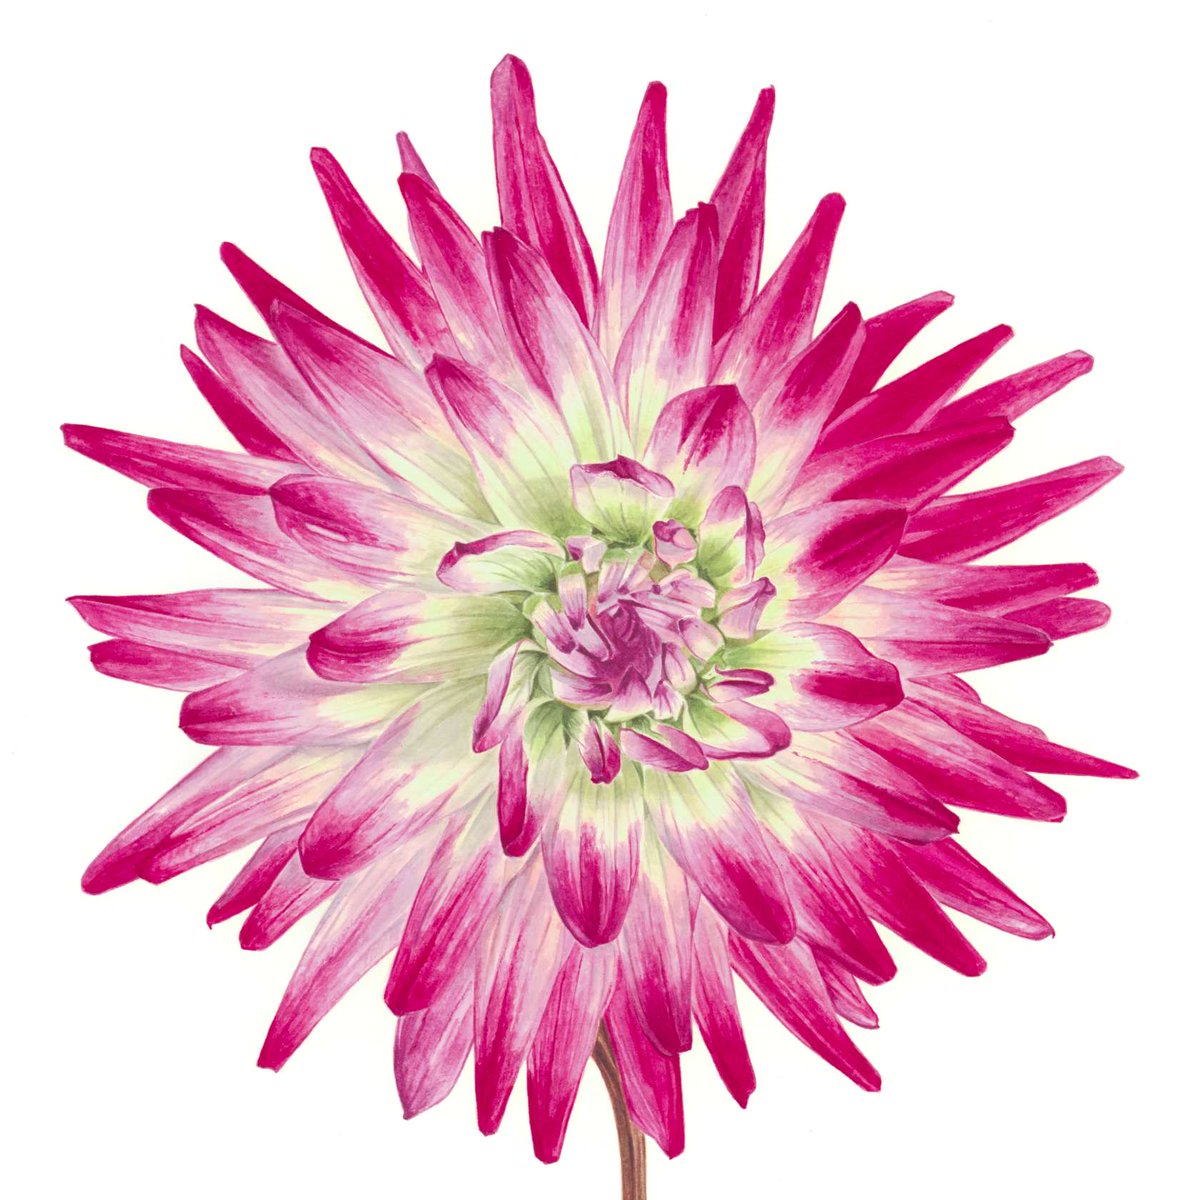 Today’s 'Pic of the Day' is a botanical painting by Abigail Panzeri (Artweeks listing 449, artweeks.org/v/abigail-panz…) who is exhibiting in Aston Tirrold during South Oxfordshire week (18th-27th May). 

To choose other artists and venues to visit, head to artweeks.org